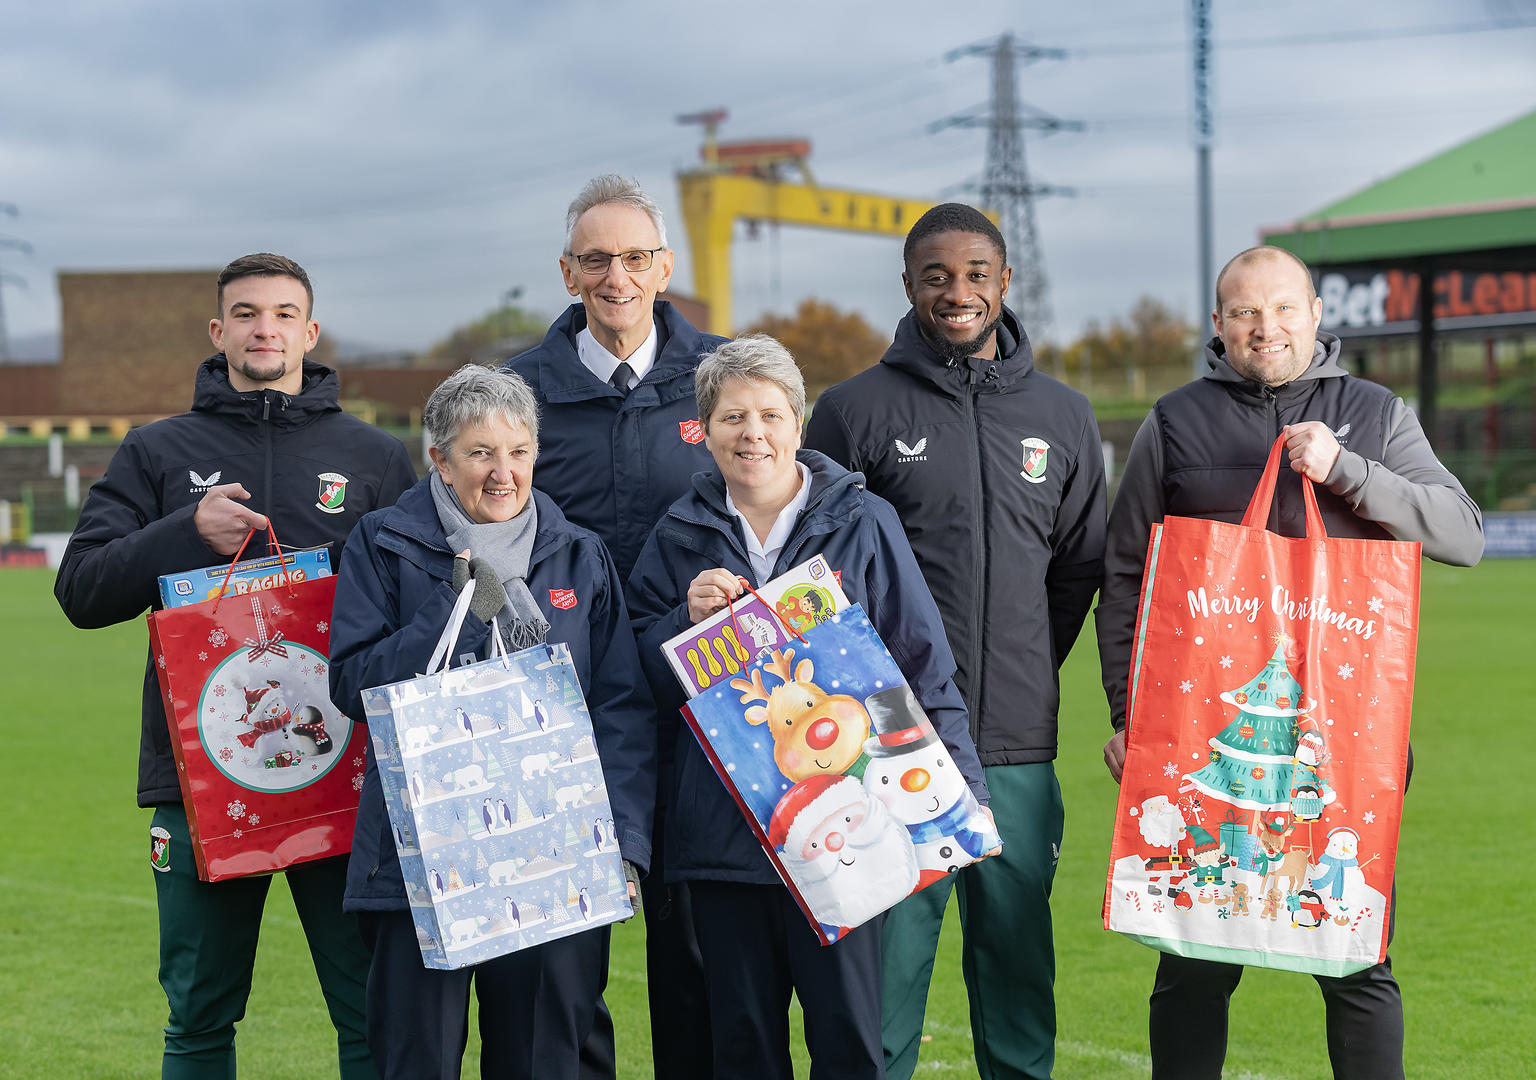 Members of Glentoran Football Club with Salvation Army Officers holding Christmas toys in gift bags.